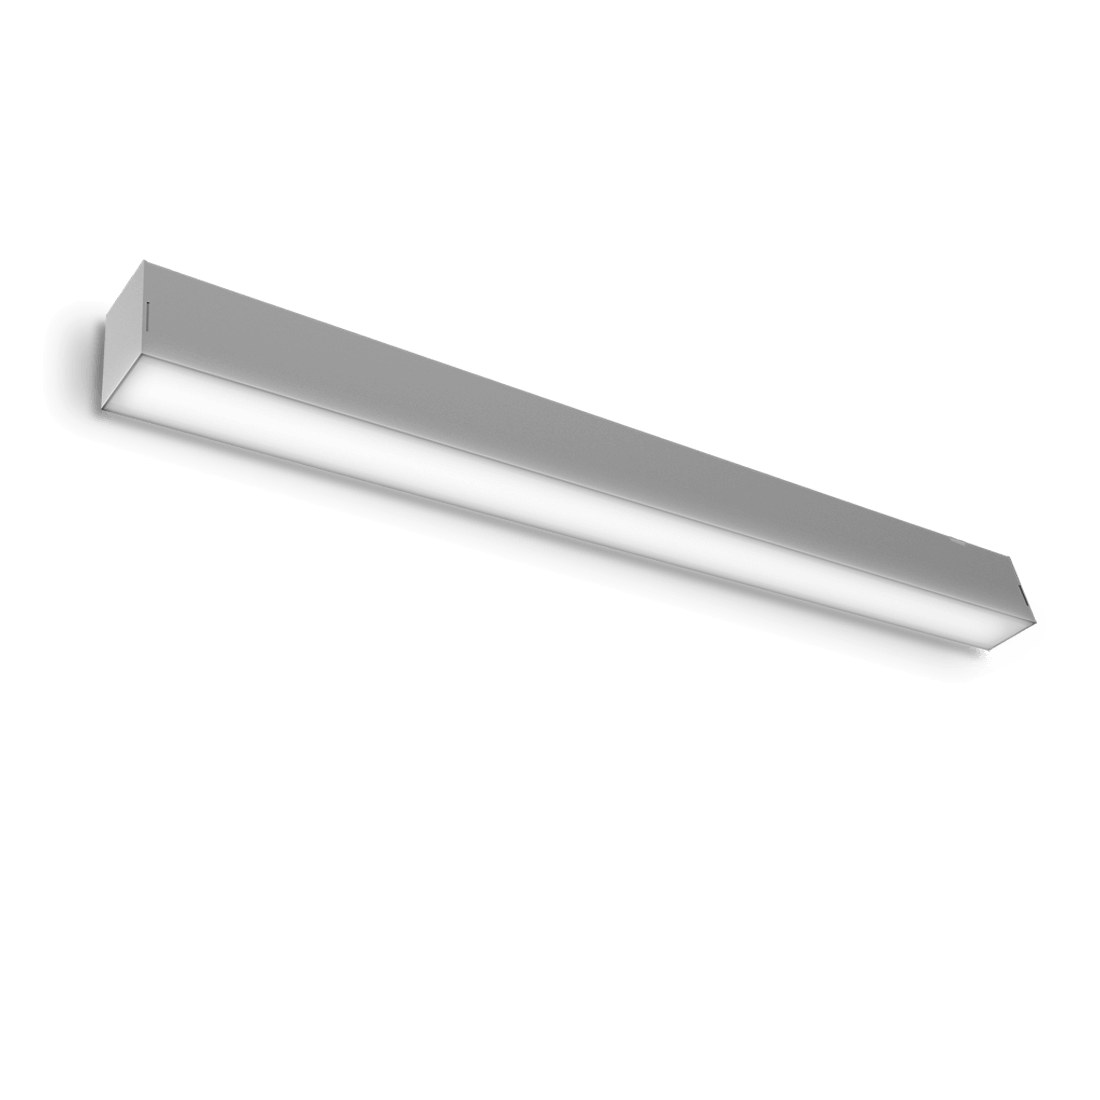 LED linear light fixture mounted on wall